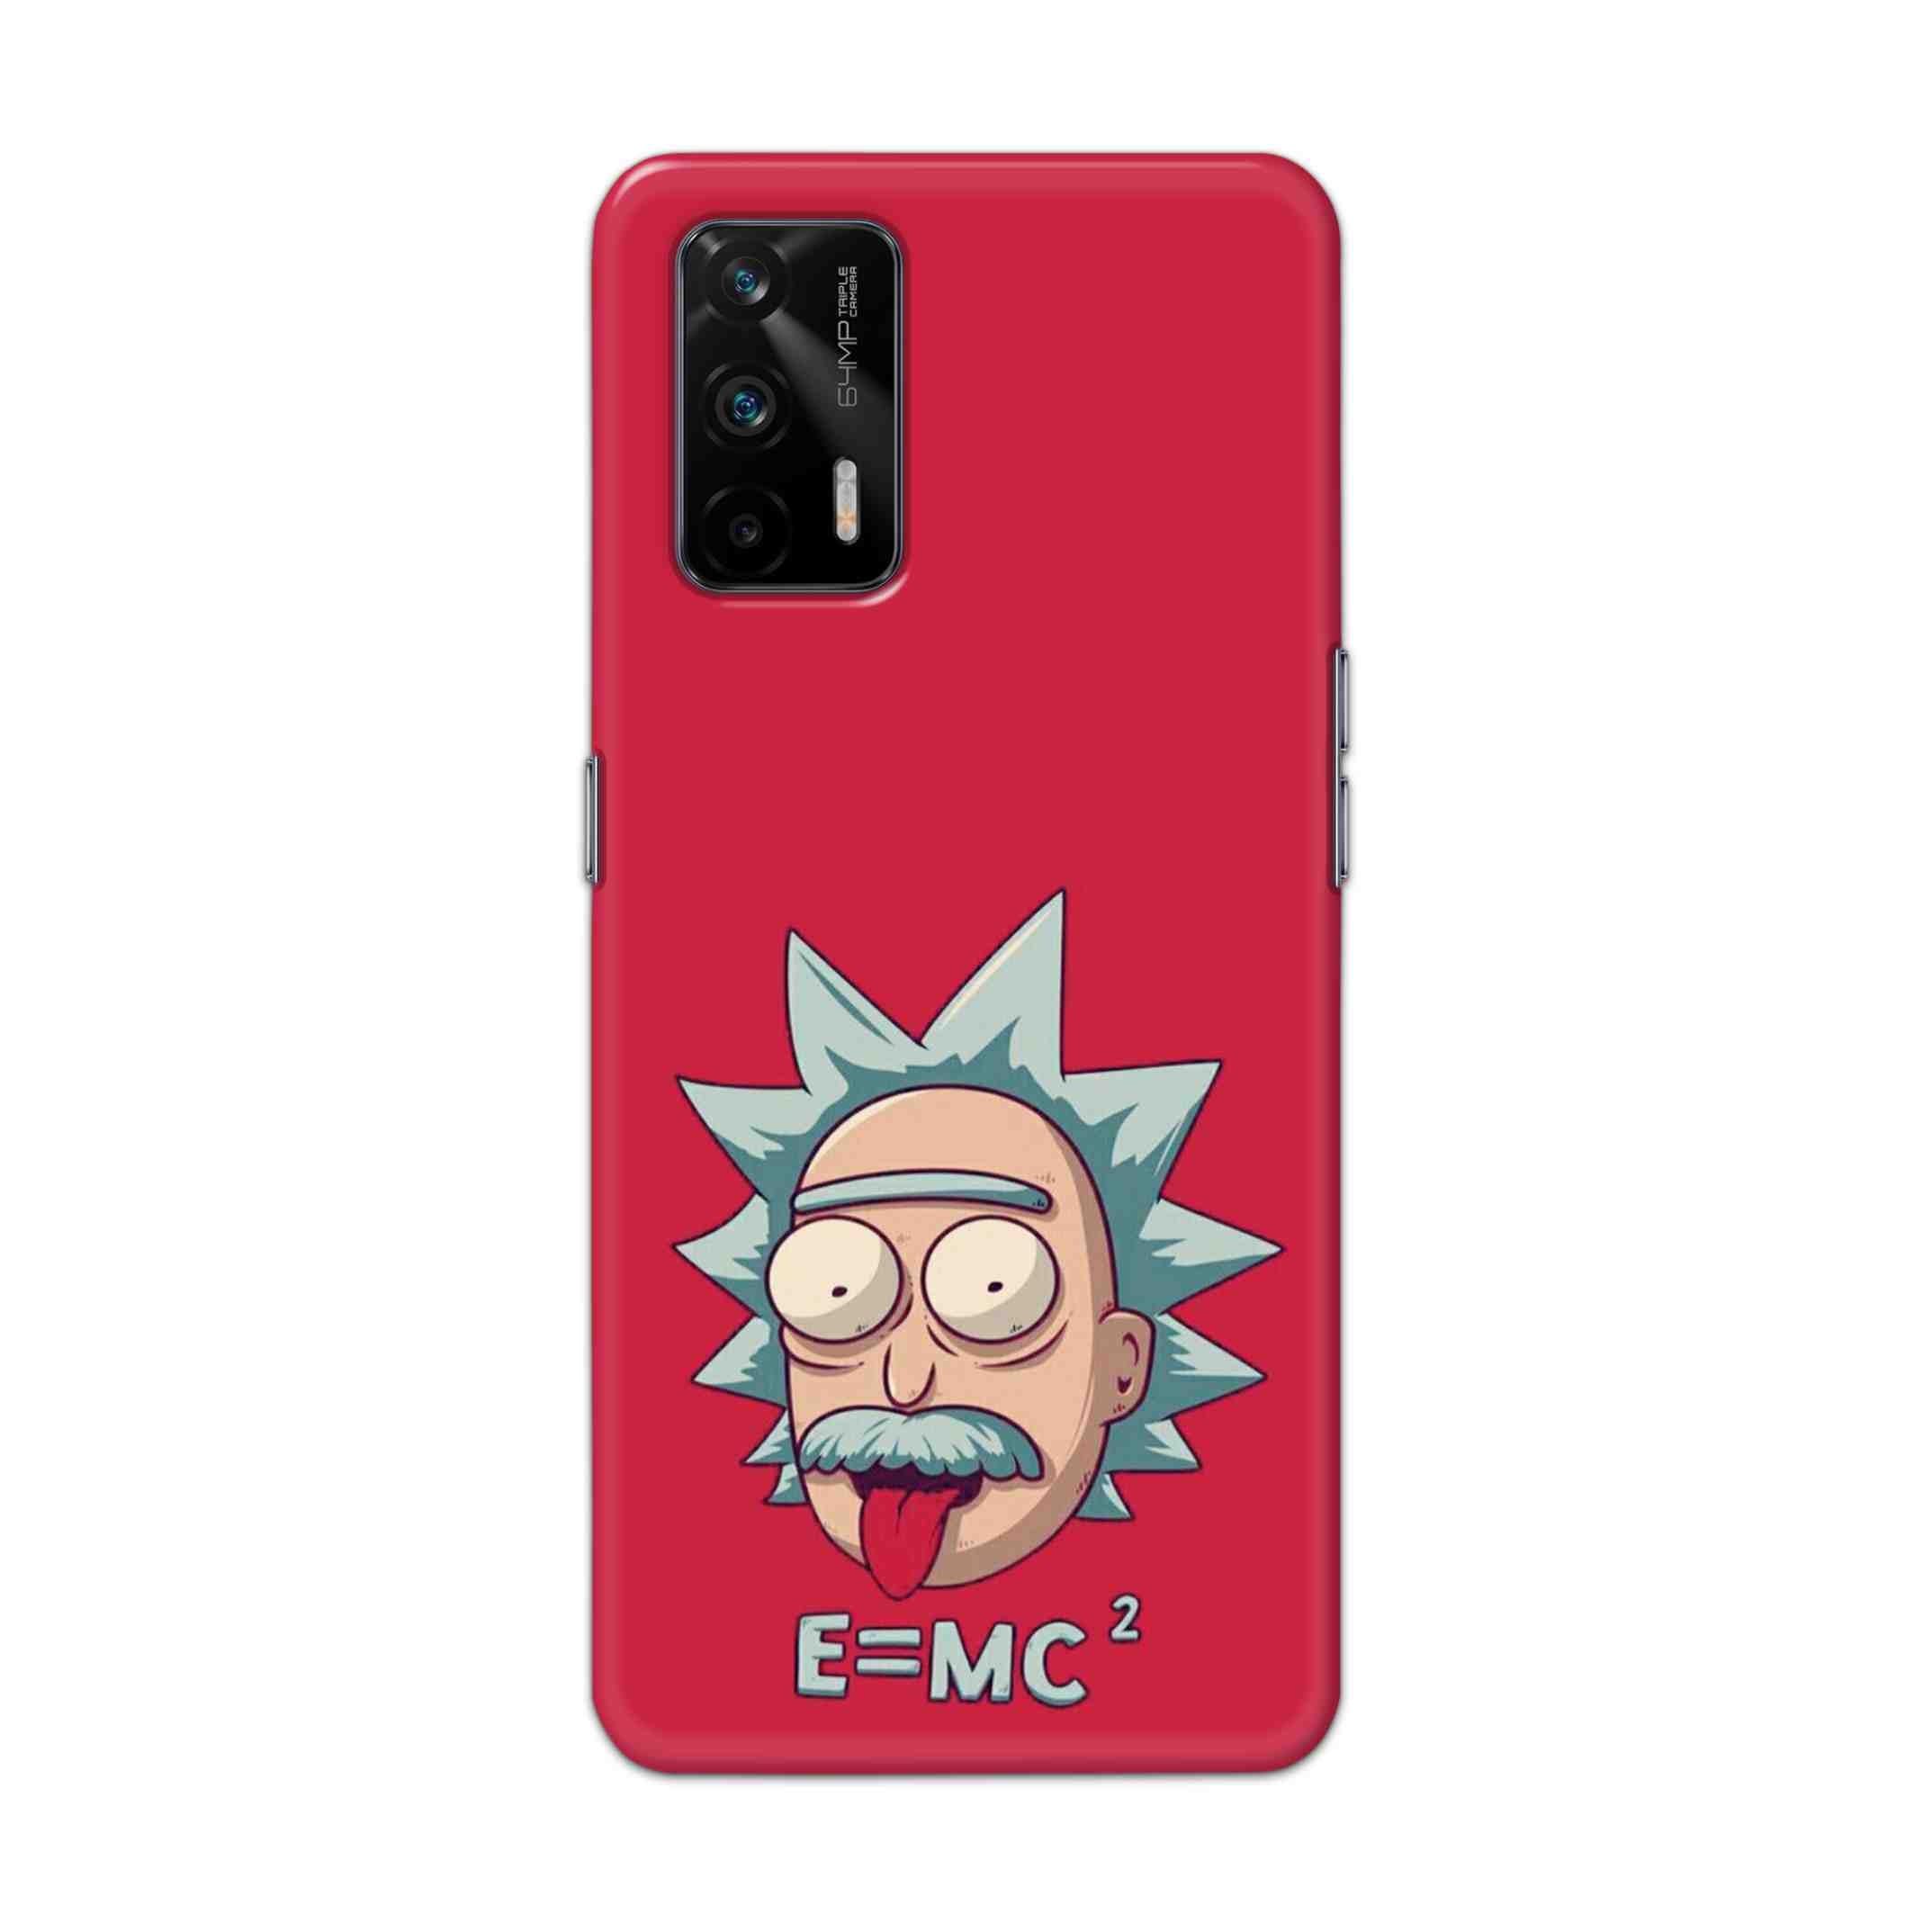 Buy E=Mc Hard Back Mobile Phone Case Cover For Realme X7 Max Online